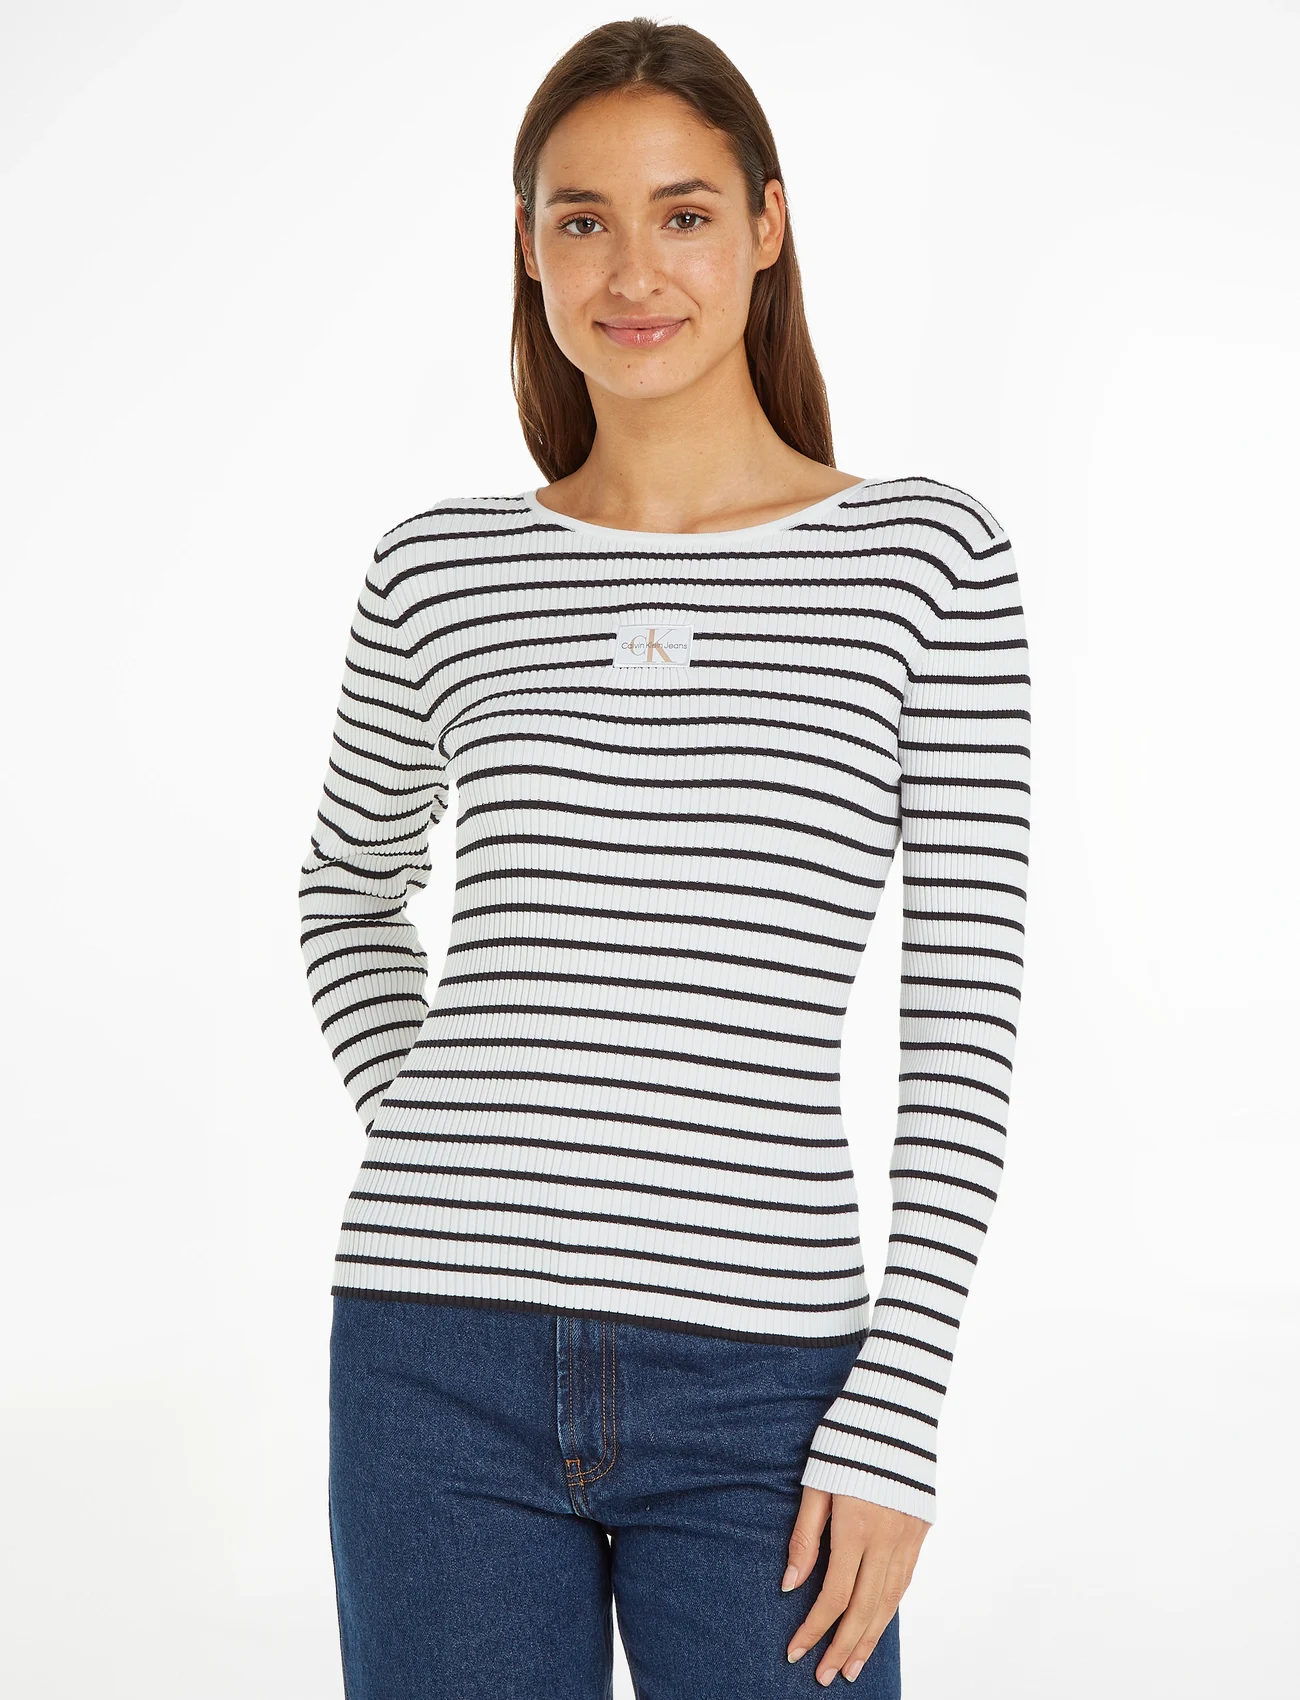 Calvin Klein Jeans - WOVEN LABEL TIGHT SWEATER - long-sleeved tops - ck black / bright white striped - 1